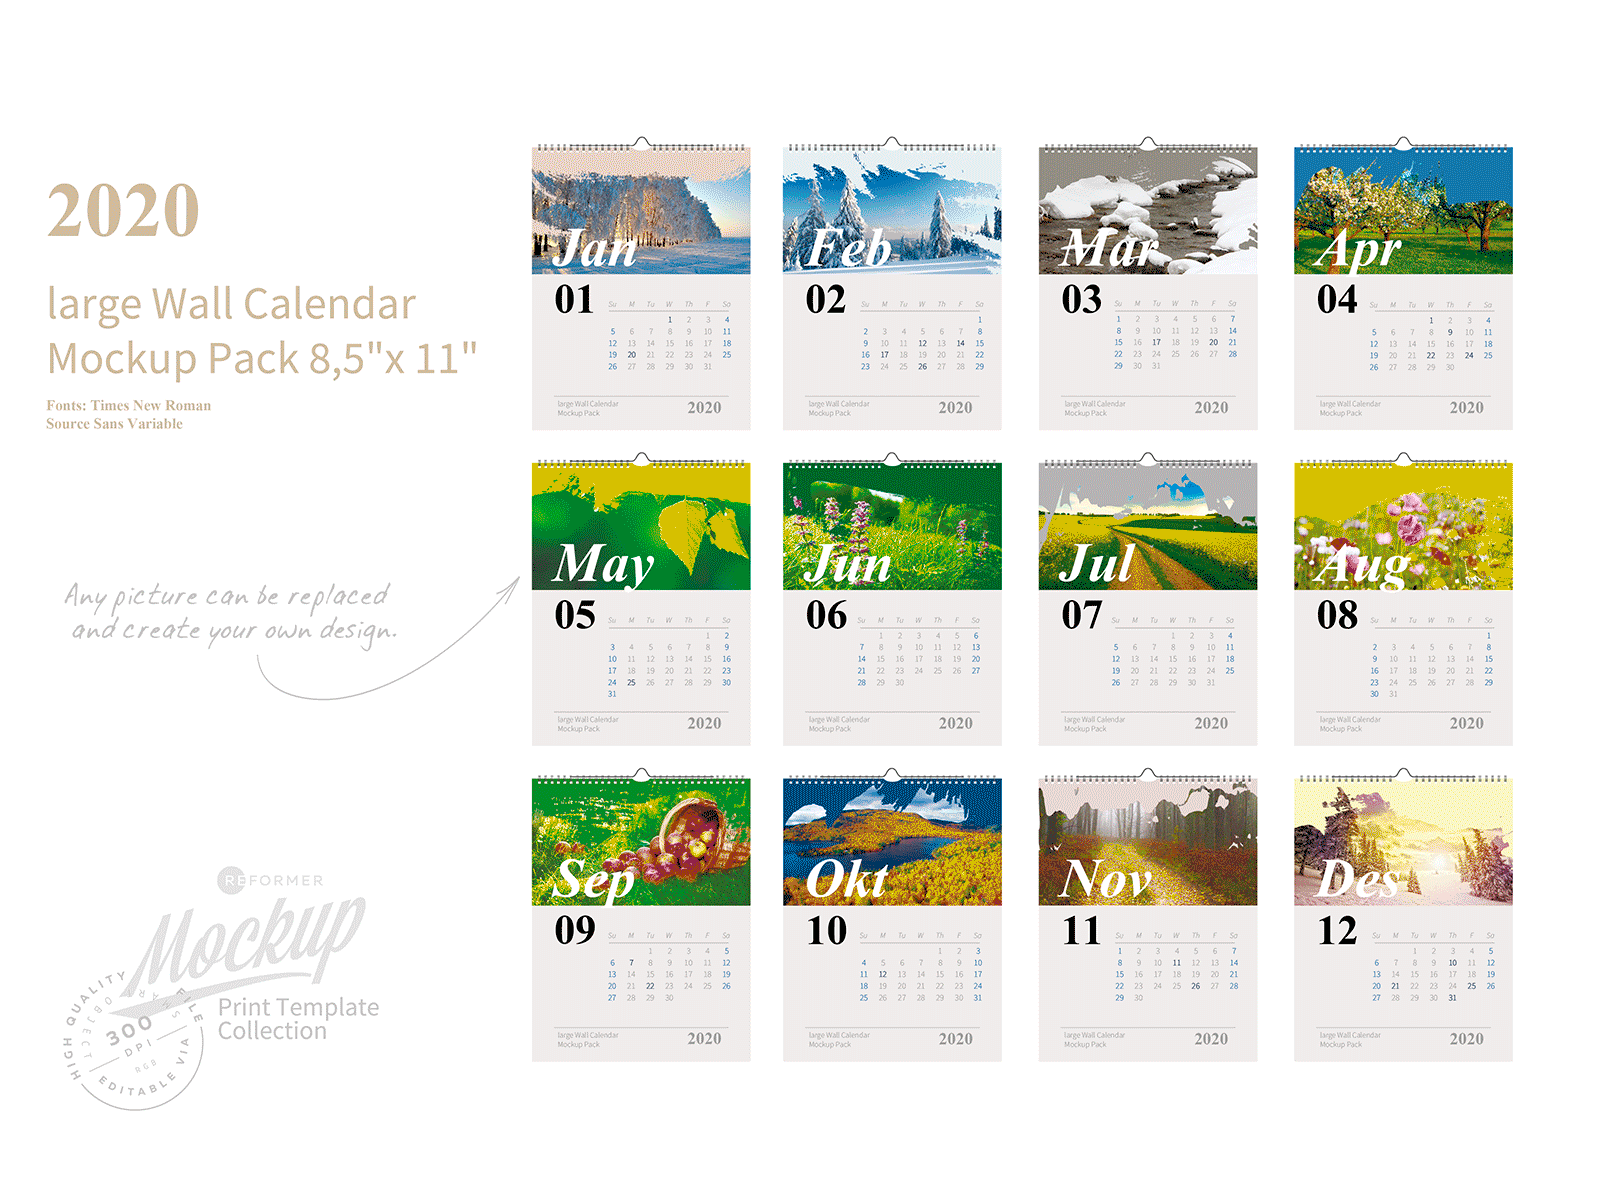 2020 large Wall Calendar Mockup Pack 2020 calendar calendar mockup calender calender mock up clean corporate date graphic mockup new year office photography presentation print ready real realistic ring season seasons smart objects